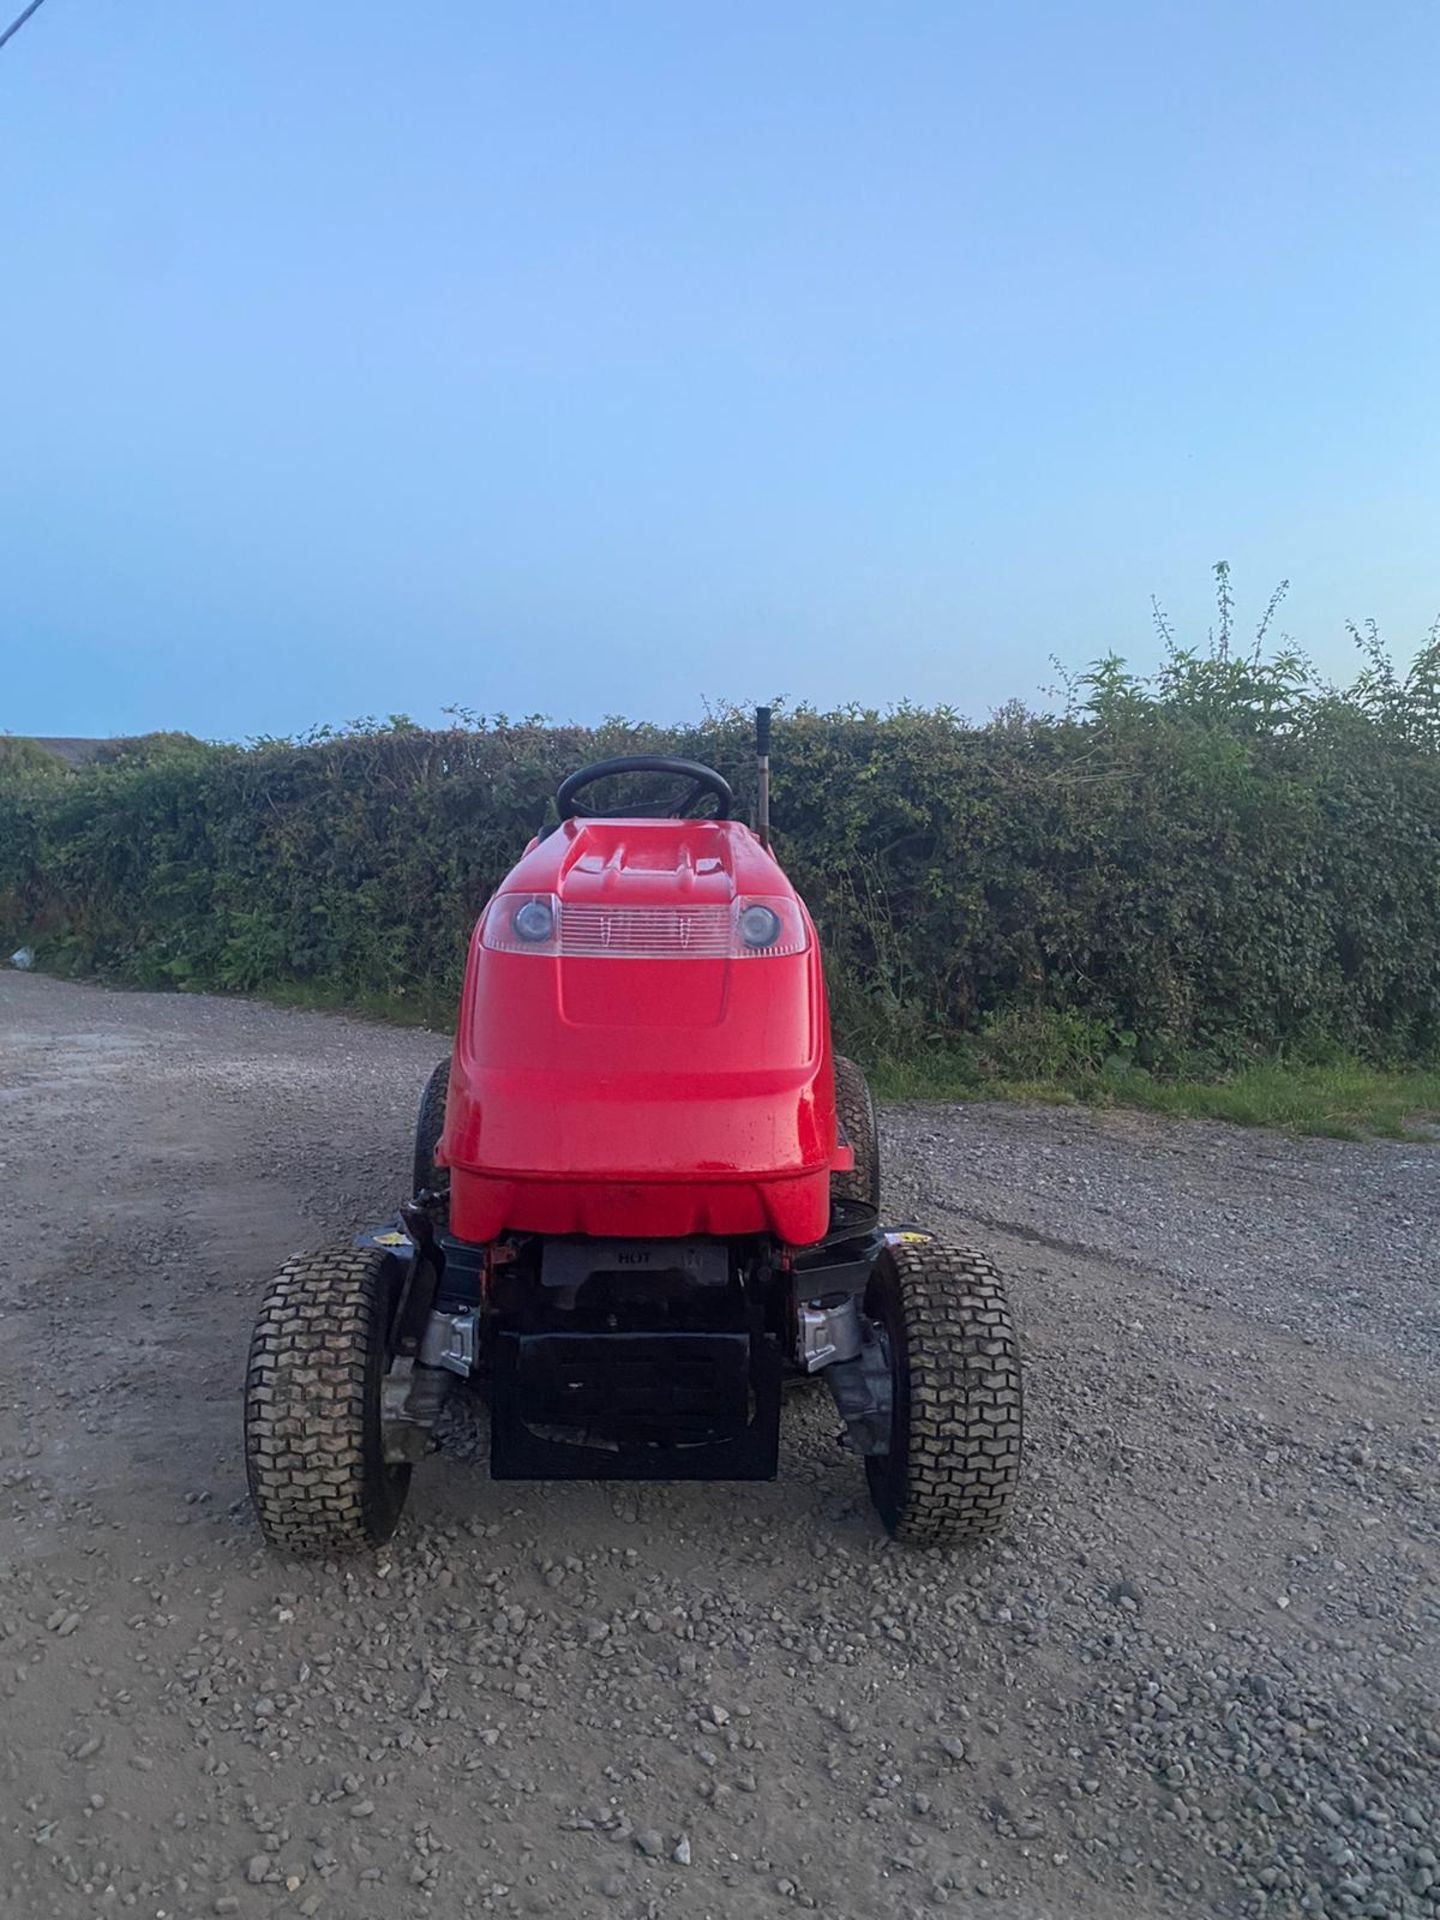 COUNTAX C600H RIDE ON LAWN MOWER, 4 WHEEL DRIVE, RUNS DRIVES CUTS AND COLLECTS *NO VAT* - Image 3 of 7